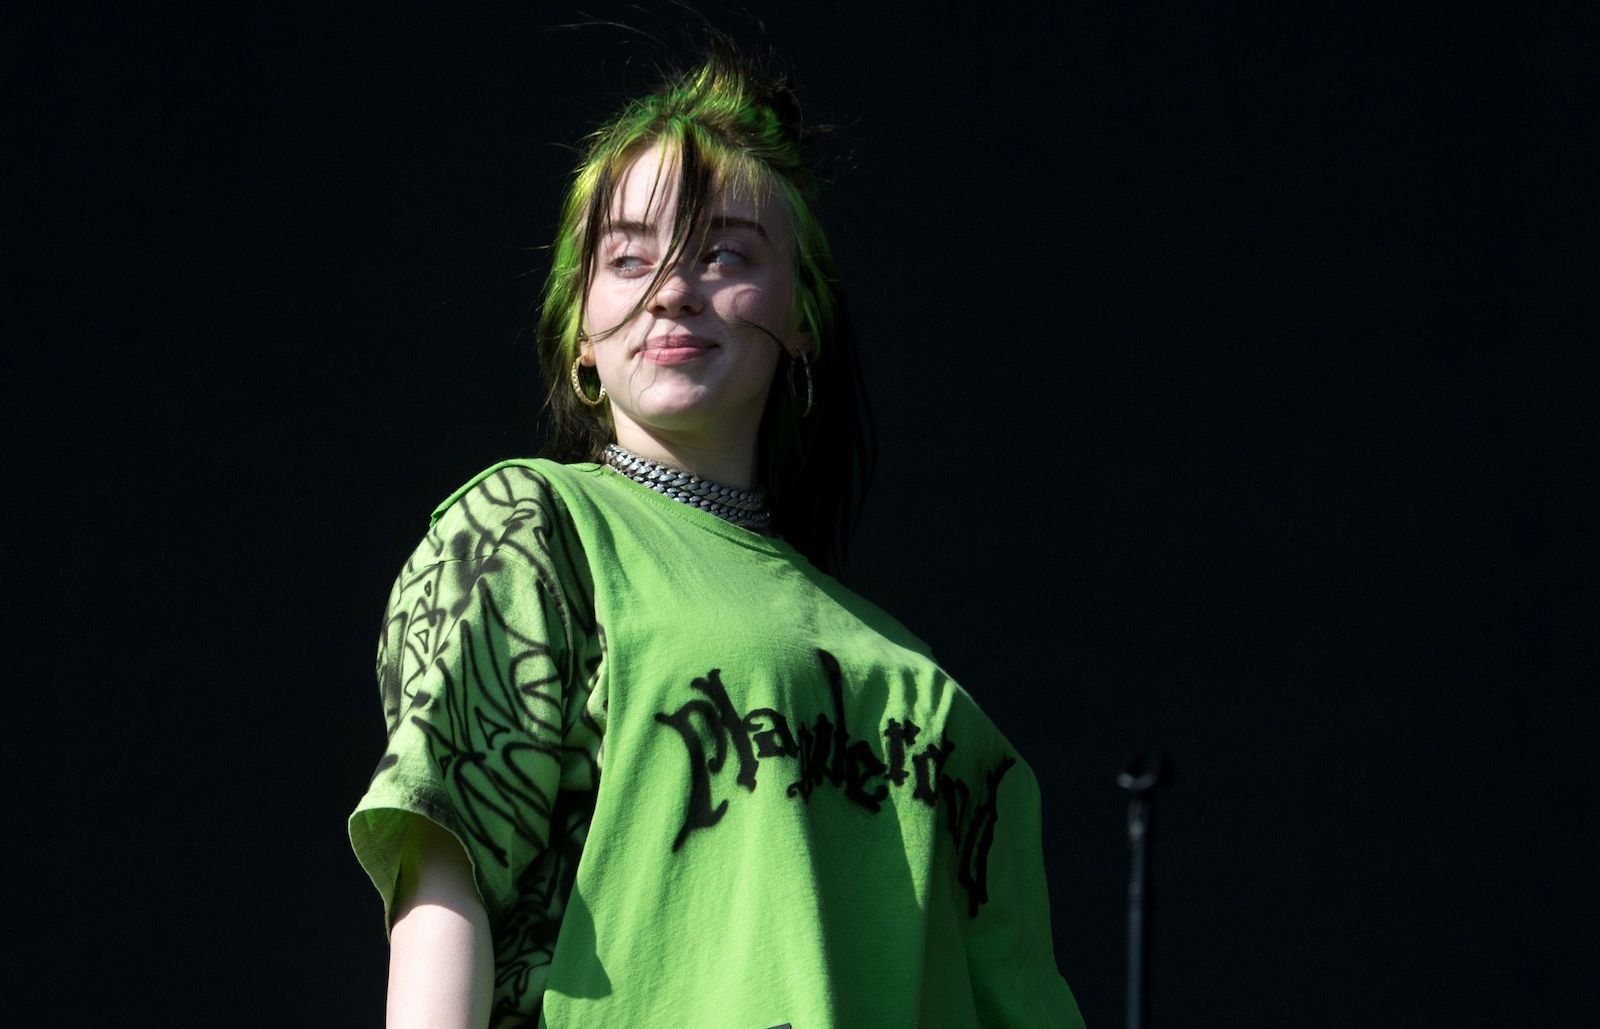 Where to buy the tickets for the Billie Eilish concert in Milan The one and only gig in Italy will take place on the 17th of July 2020